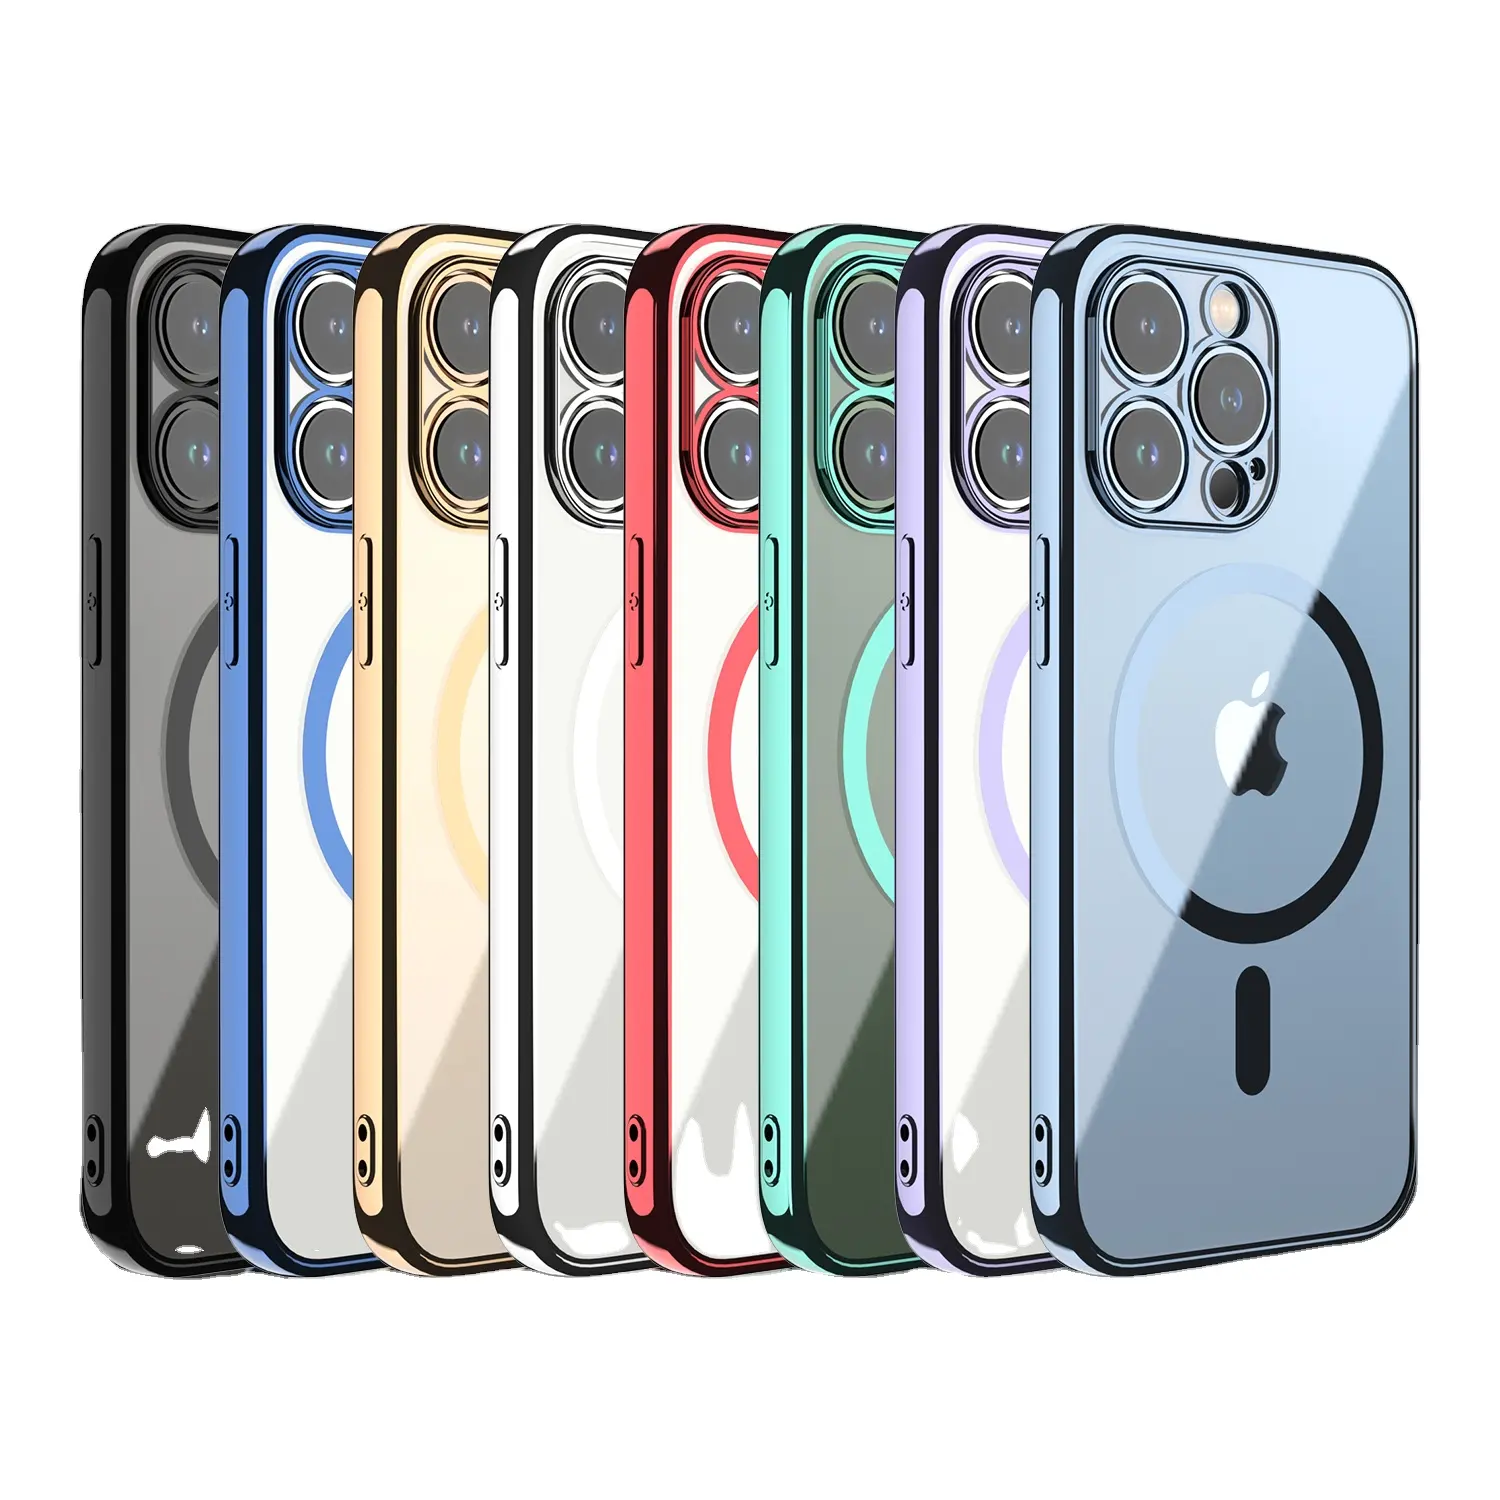 2.0 MM Thickness Crystal Clear Magnetic Chrome Mobile Phone Bags & Cases For iPhone 7 8 S Plus X XR XS MAX 11 12 13 Mini Pro Max